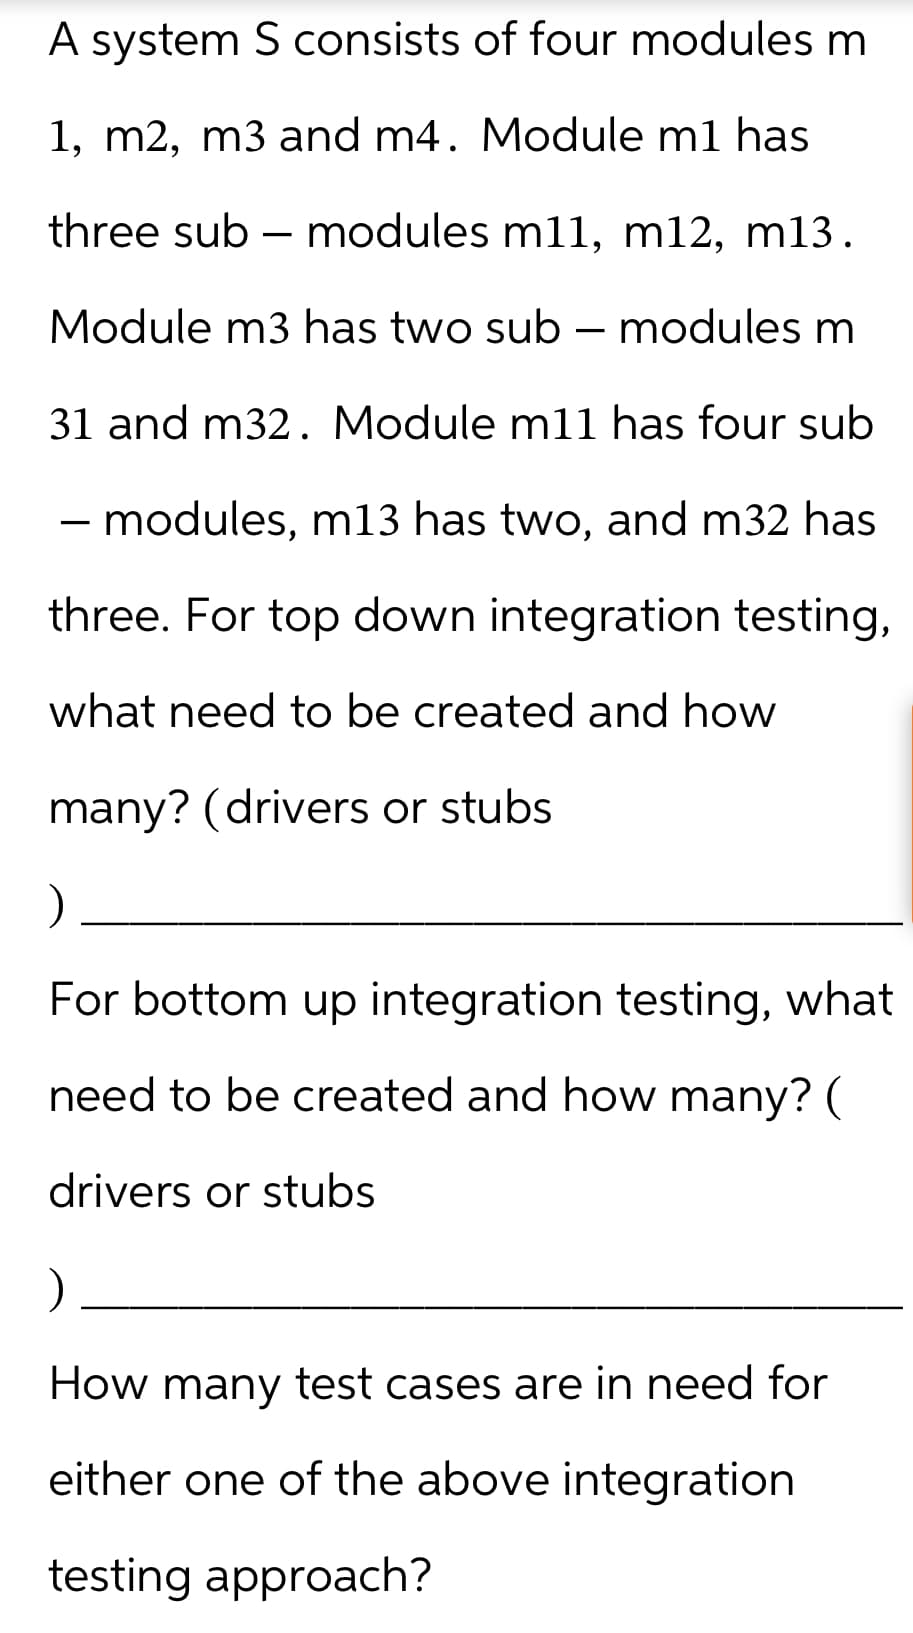 A system S consists of four modules m
1, m2, m3 and m4. Module m1 has
three sub - modules m11, m12, m13.
Module m3 has two sub - modules m
31 and m32. Module m11 has four sub
- modules, m13 has two, and m32 has
three. For top down integration testing,
what need to be created and how
many? (drivers or stubs
)
For bottom up integration testing, what
need to be created and how many? (
drivers or stubs
)
How many test cases are in need for
either one of the above integration
testing approach?